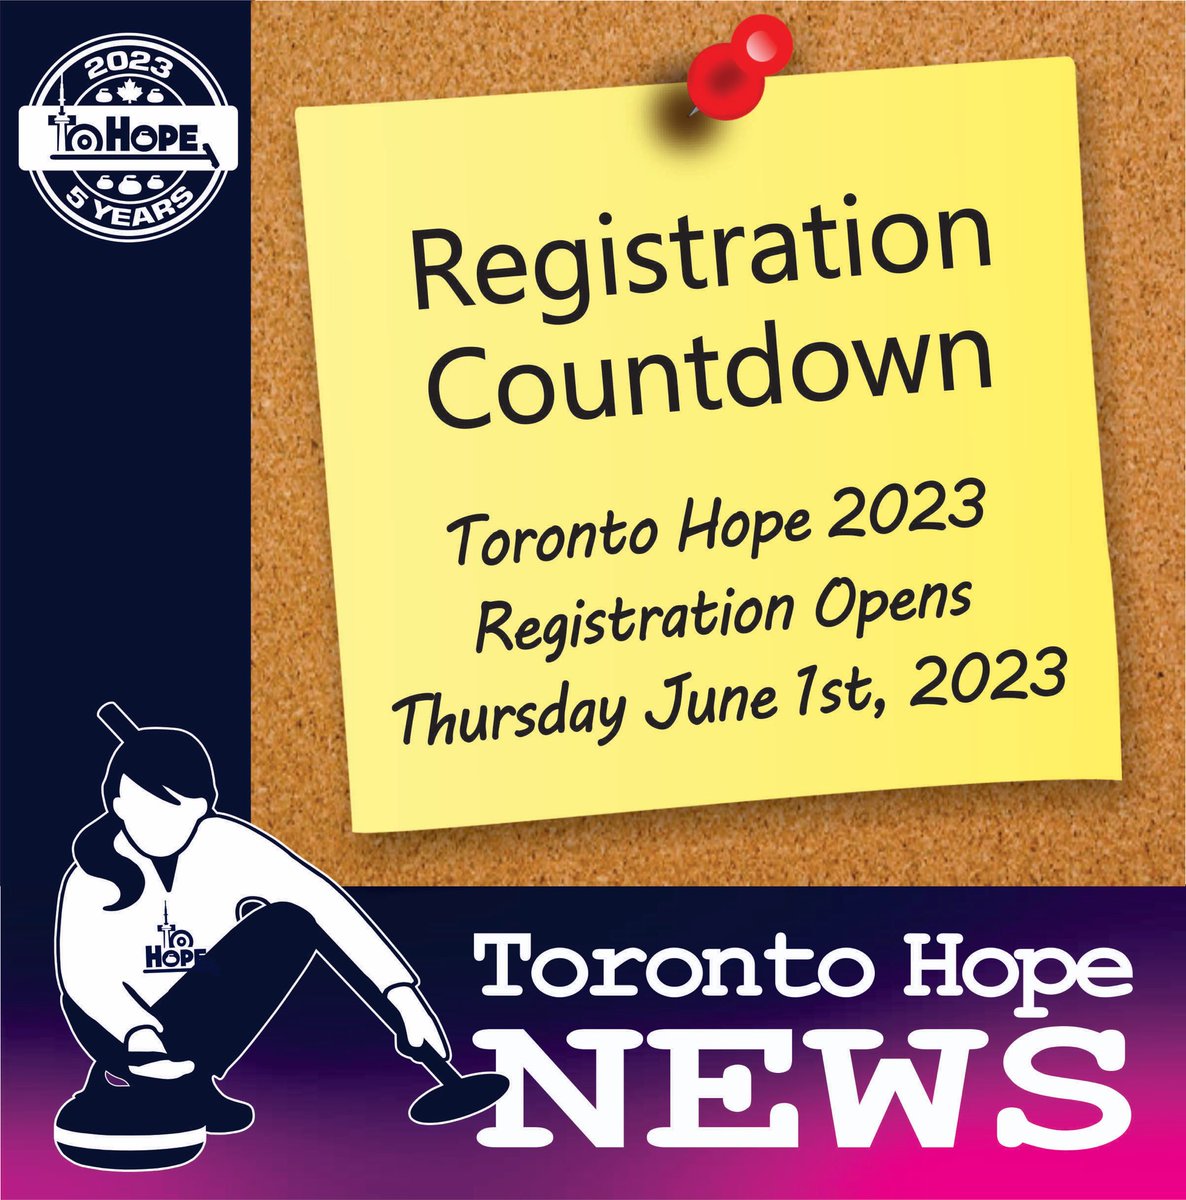 TO Hope 2023 Registration Countdown!
A reminder that TO Hope 2023 Registration opens Thursday, June 1st! 
We cannot wait to welcome women’s curling teams from across the GTA on November 4, 2023 at the Leaside Curling Club! 1/2